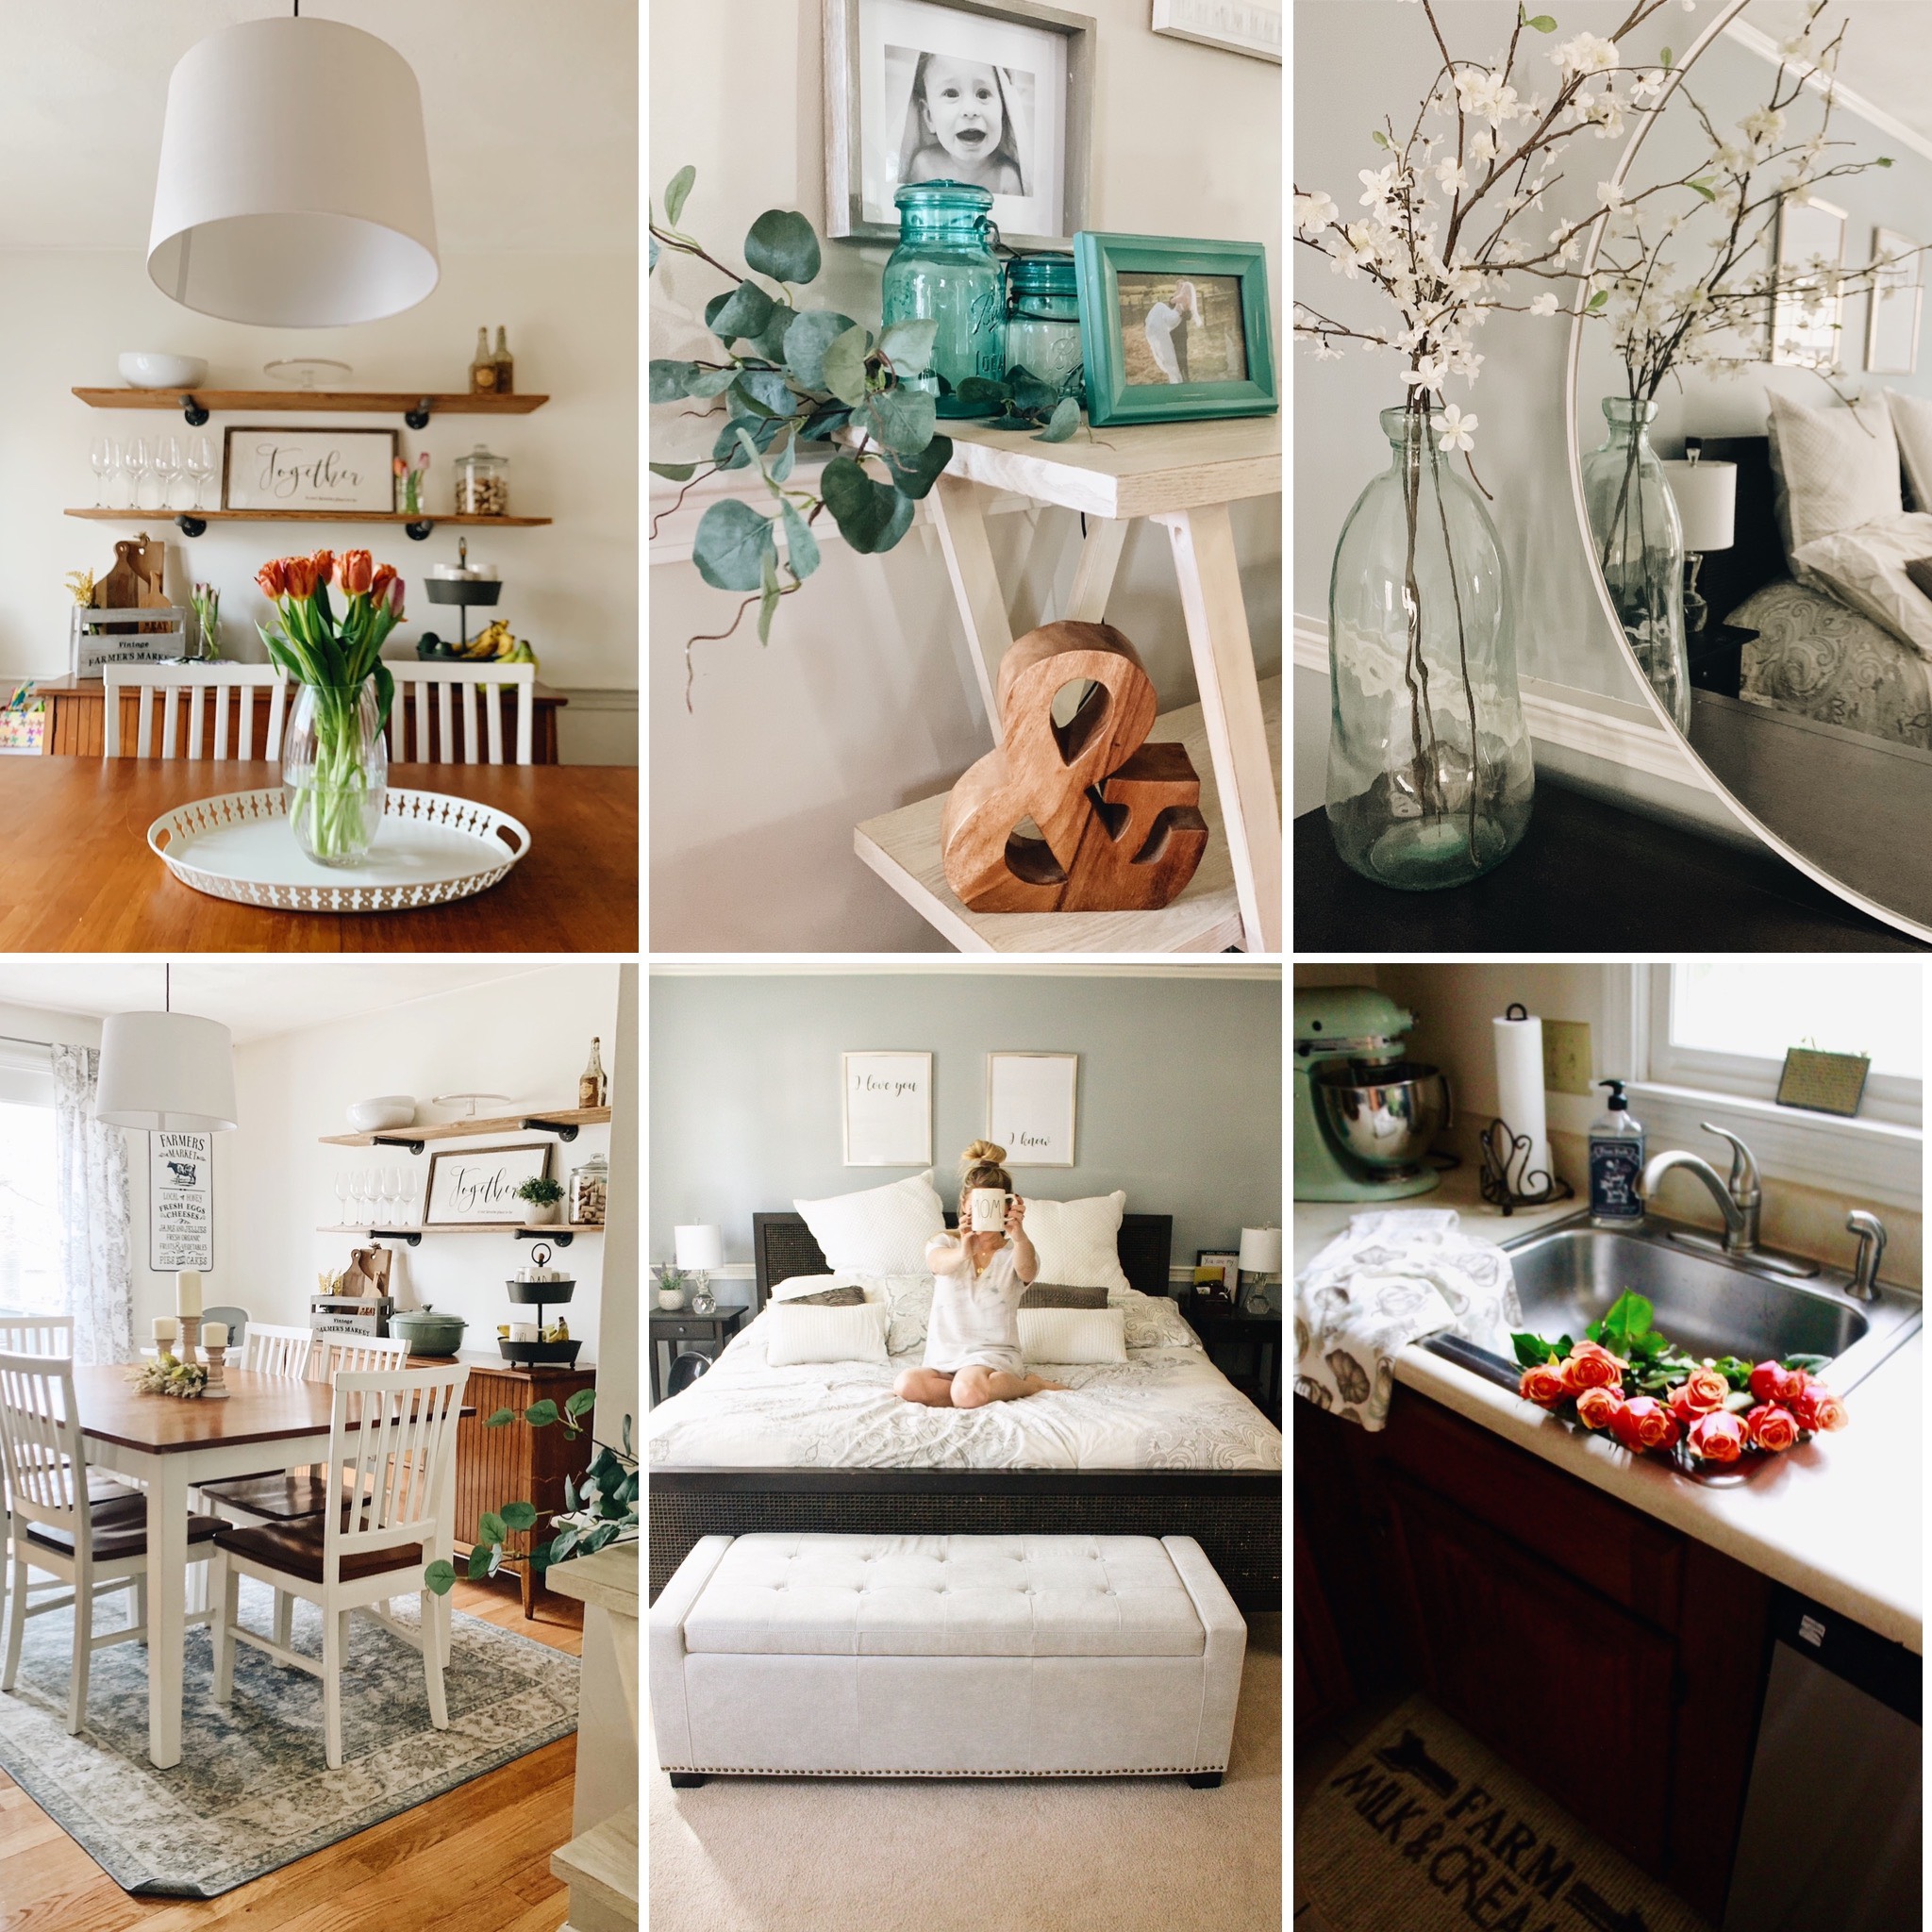 Our Little Home Style is on Instagram @ourlittlehomestyle